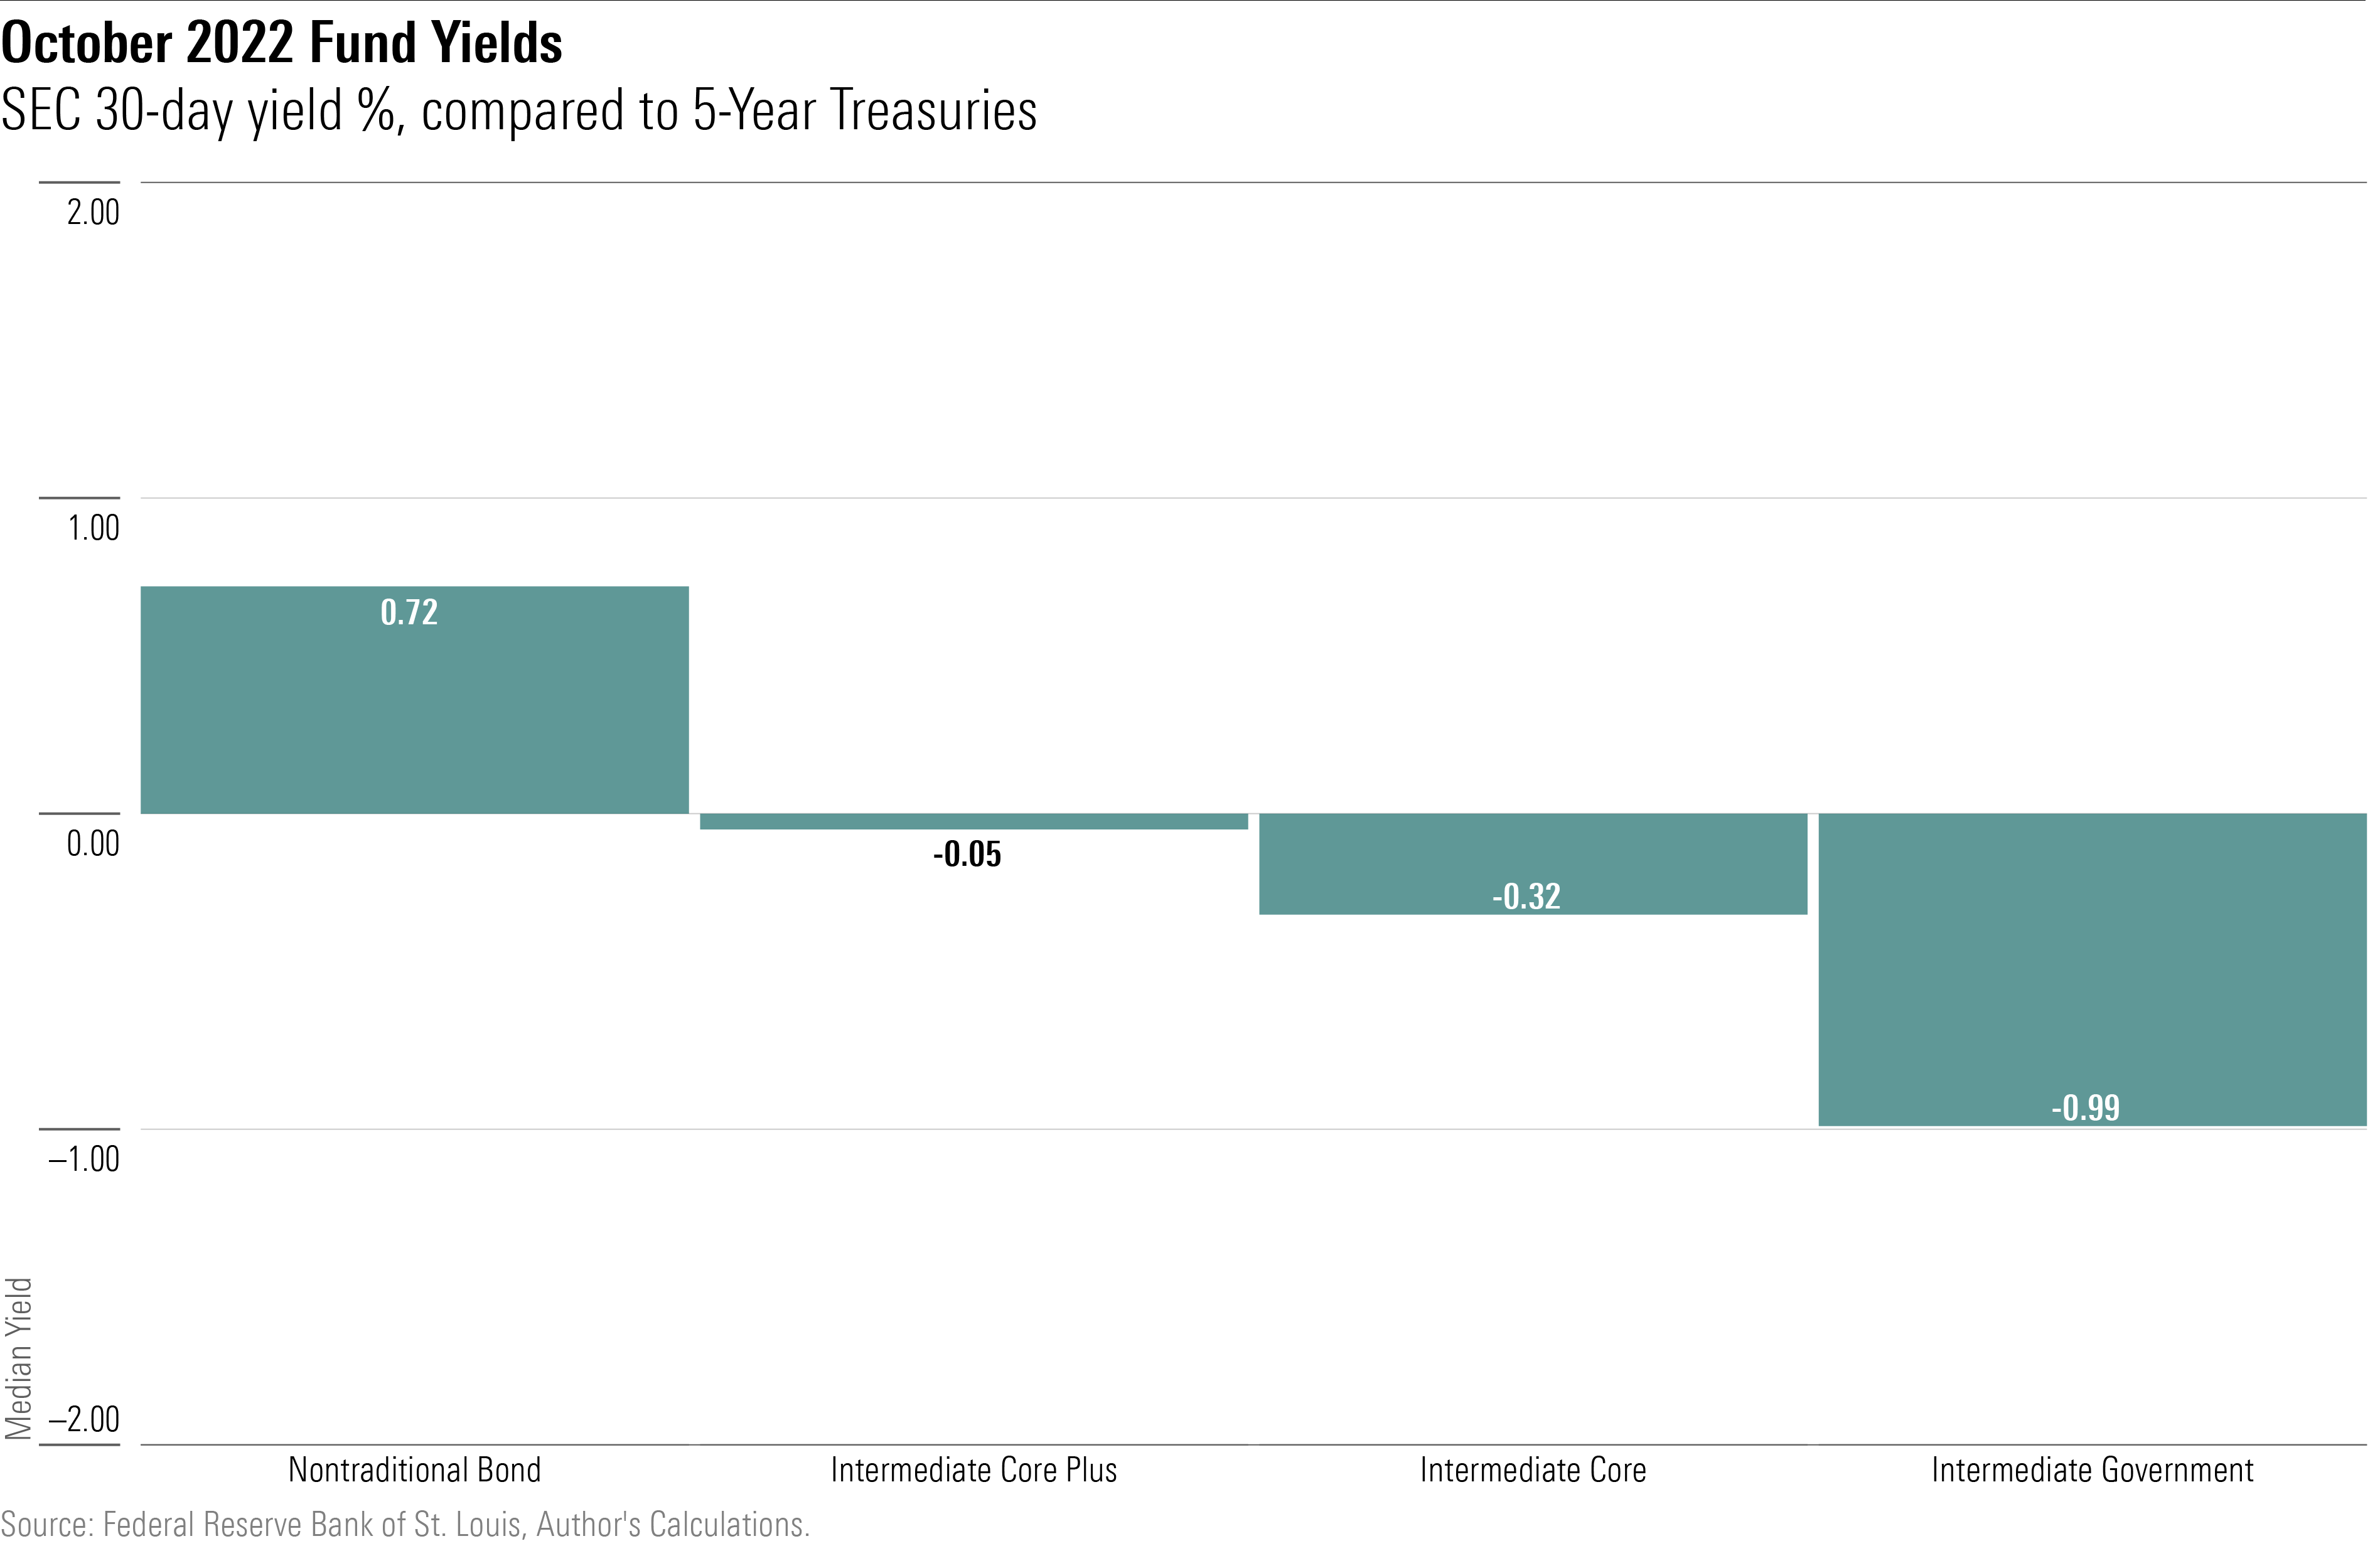 A bar chart showing the 30-day SEC yields for four bond-fund cattegories, as of 10/31/22, when compared to the yield as of that date for 5-year Treasury notes.